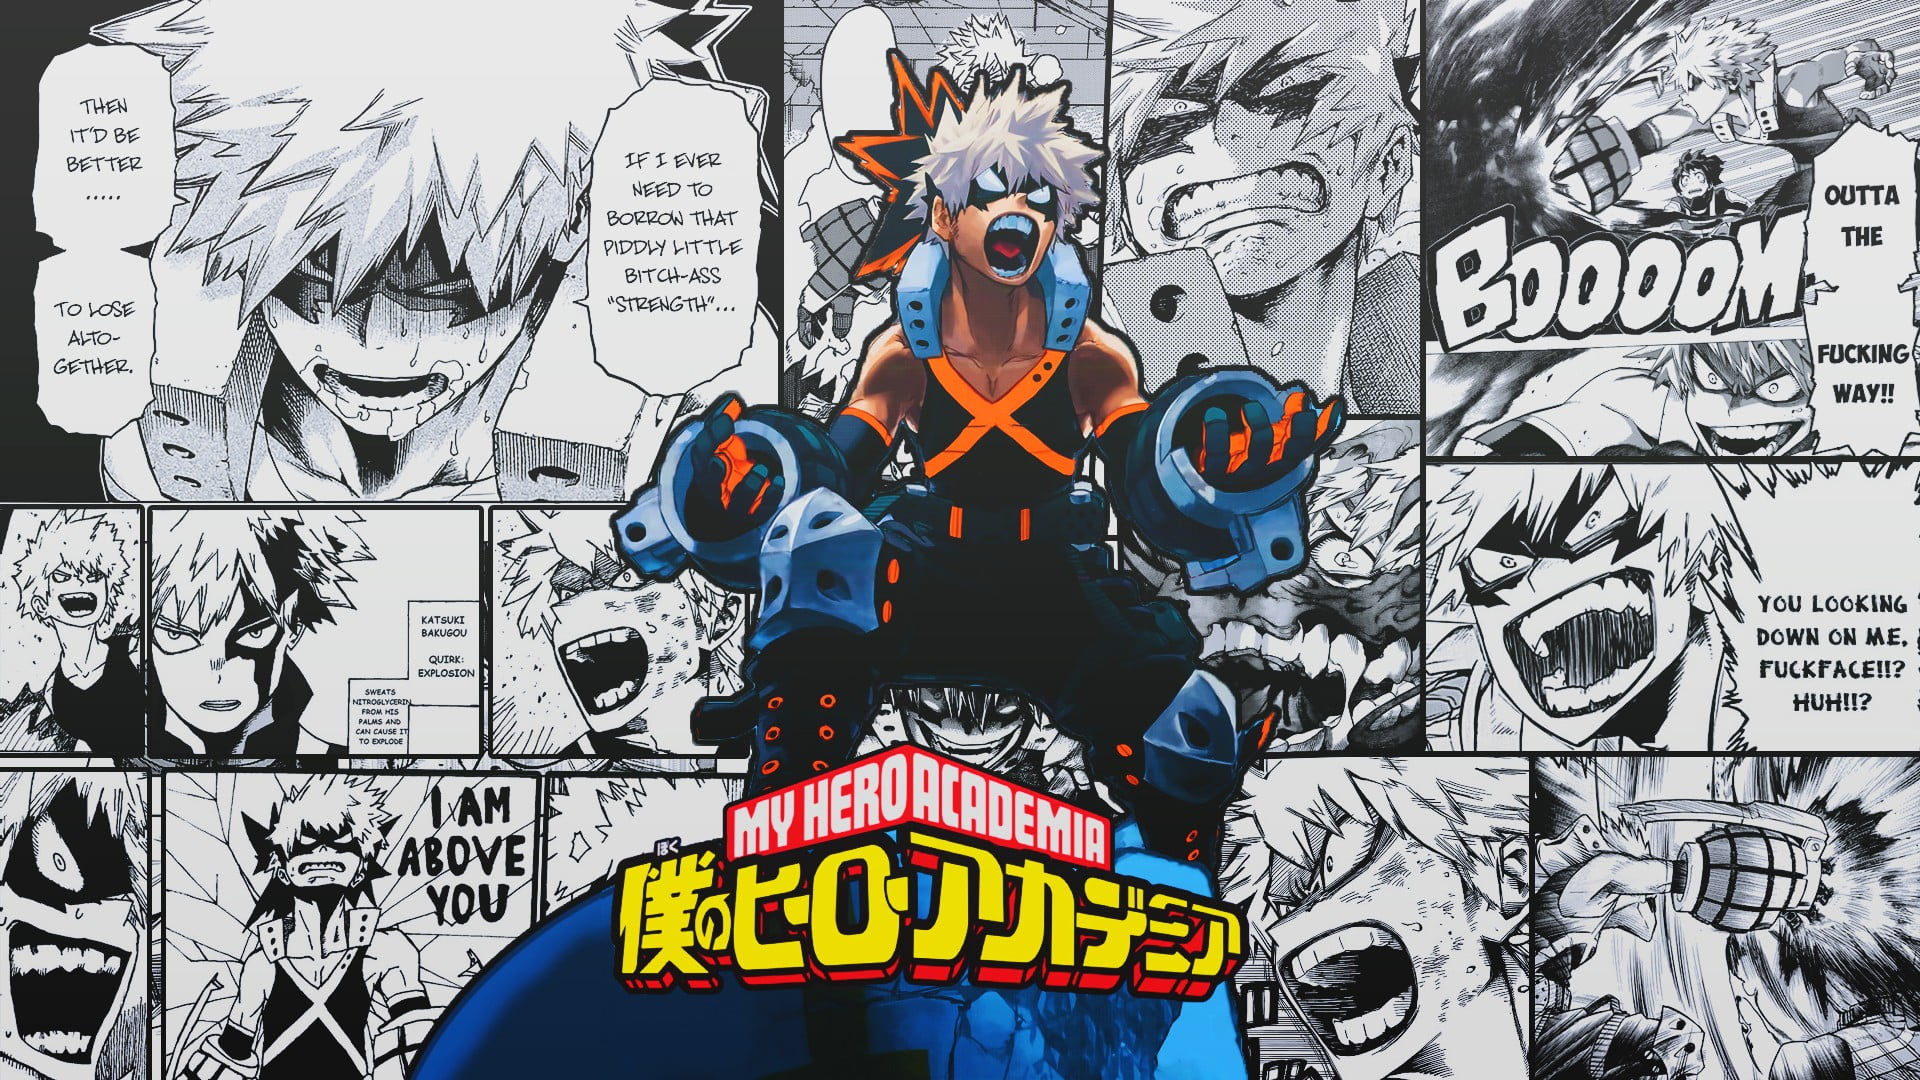 A wallpaper of the manga character with many different characters - My Hero Academia